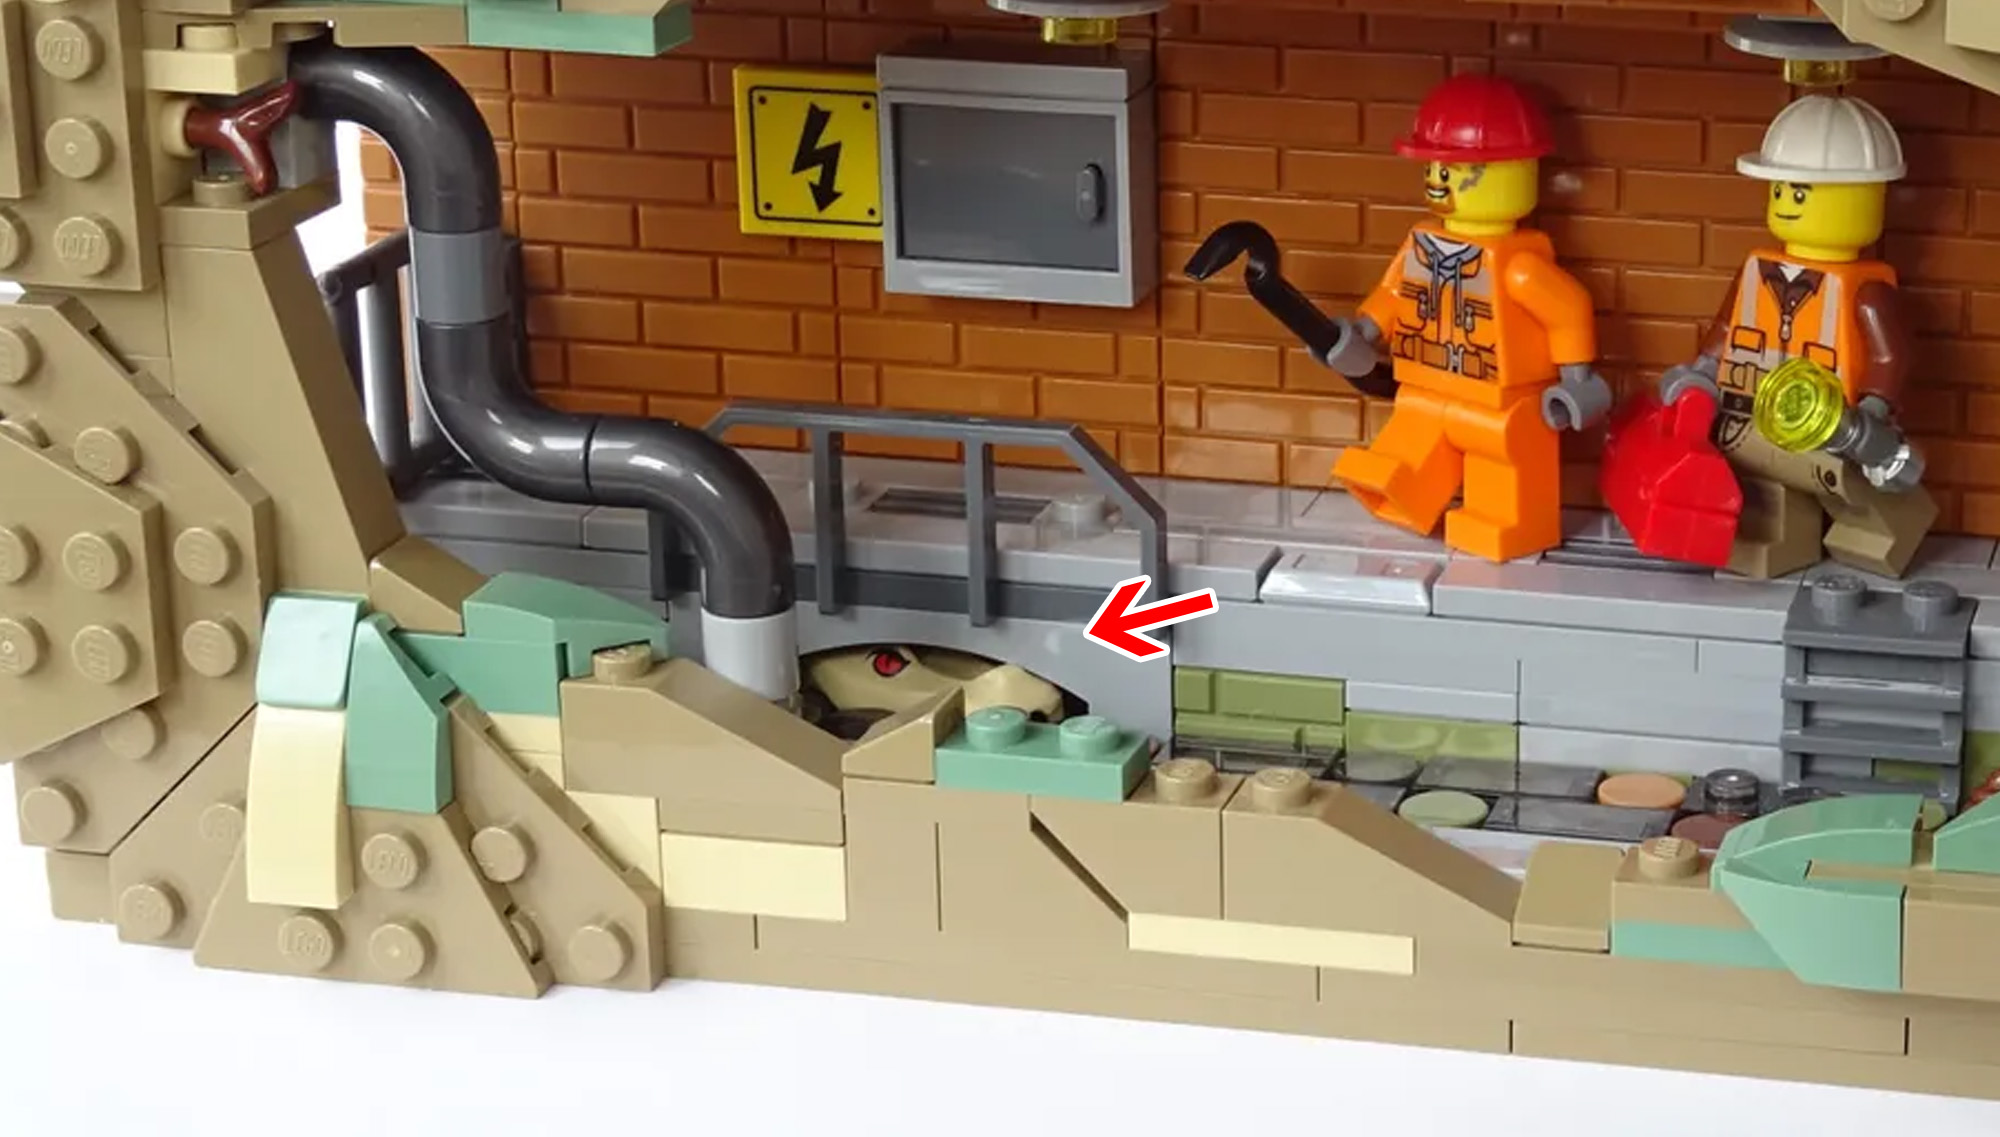 BASEMENT & SEWERAGE Achieves 10K Support on LEGO IDEAS